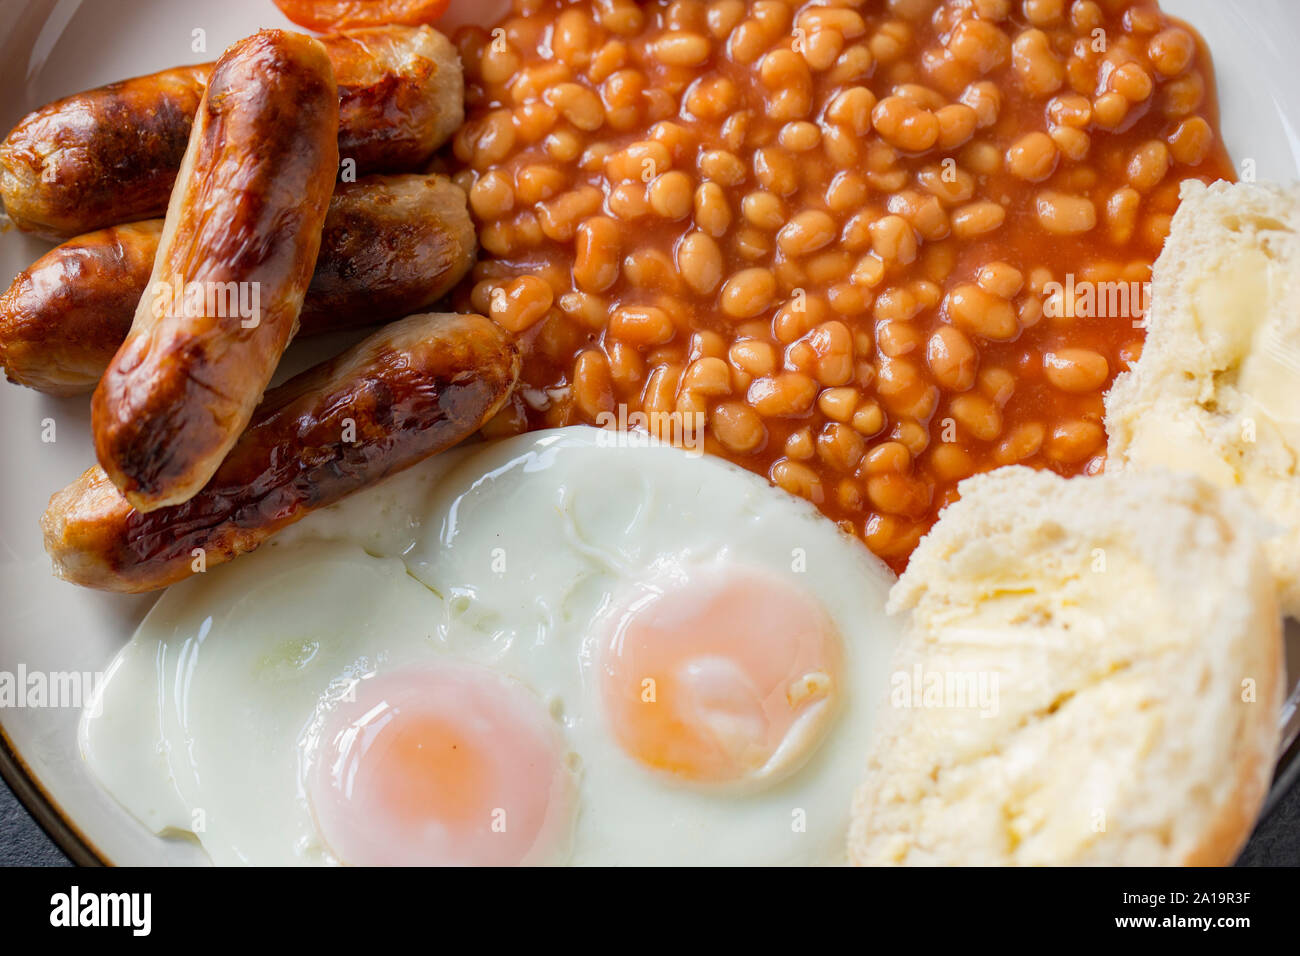 A meal of grilled pork sausages, grilled tomatoes, two fried eggs, baked beans and a buttered bread roll. Dark slate background. Dorset England UK GB Stock Photo